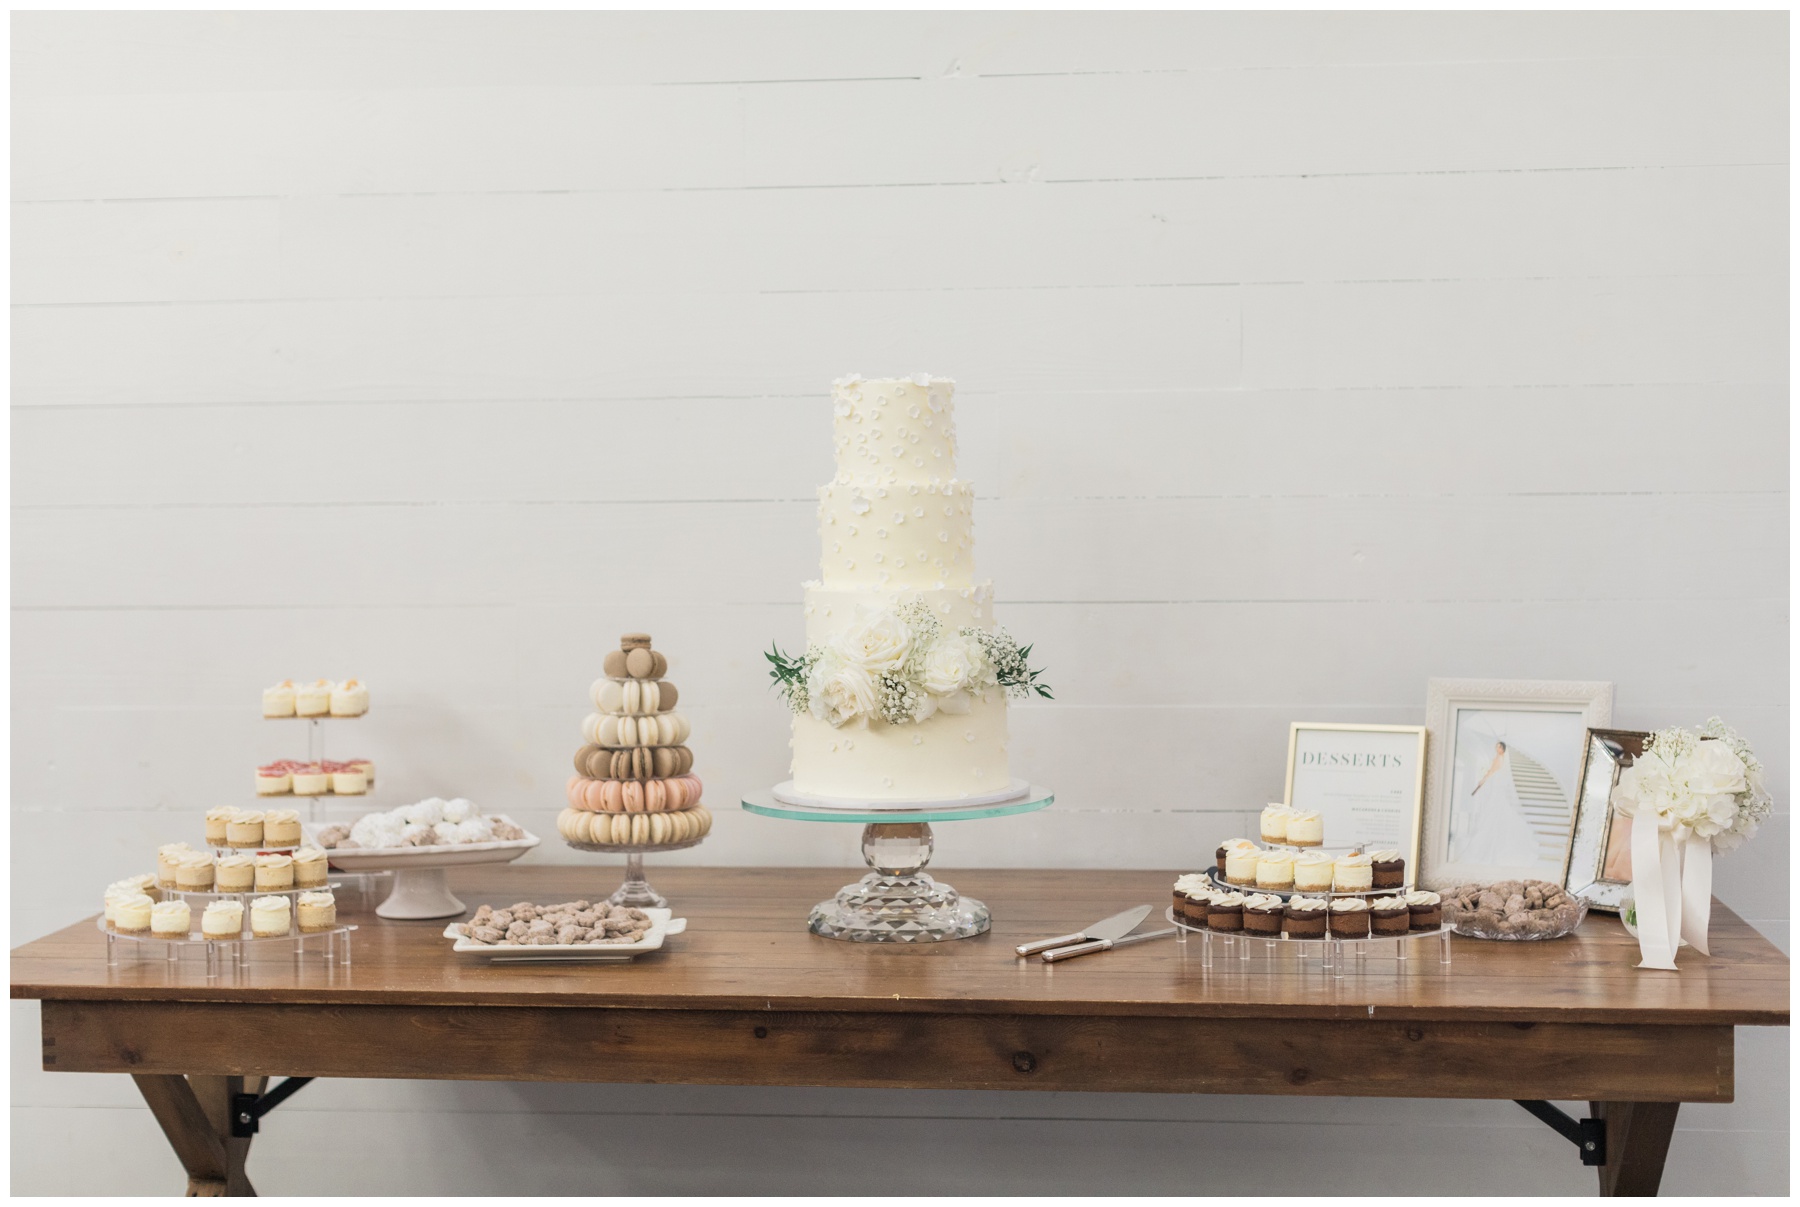 Dessert table with mini cheesecakes, macarons, Mexican wedding cookies, and a four-tiered cake at a Houston wedding